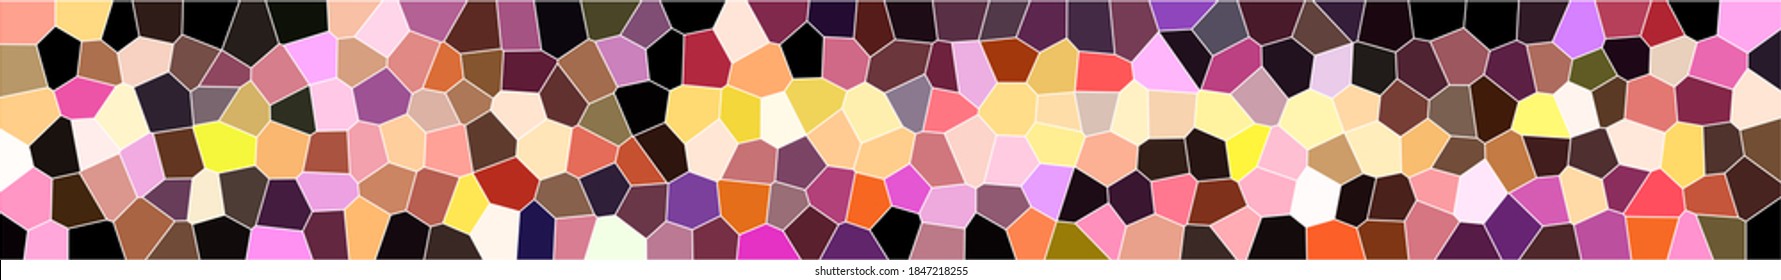 Motley, bright geometric mosaic background. Long stained glass background  - Shutterstock ID 1847218255